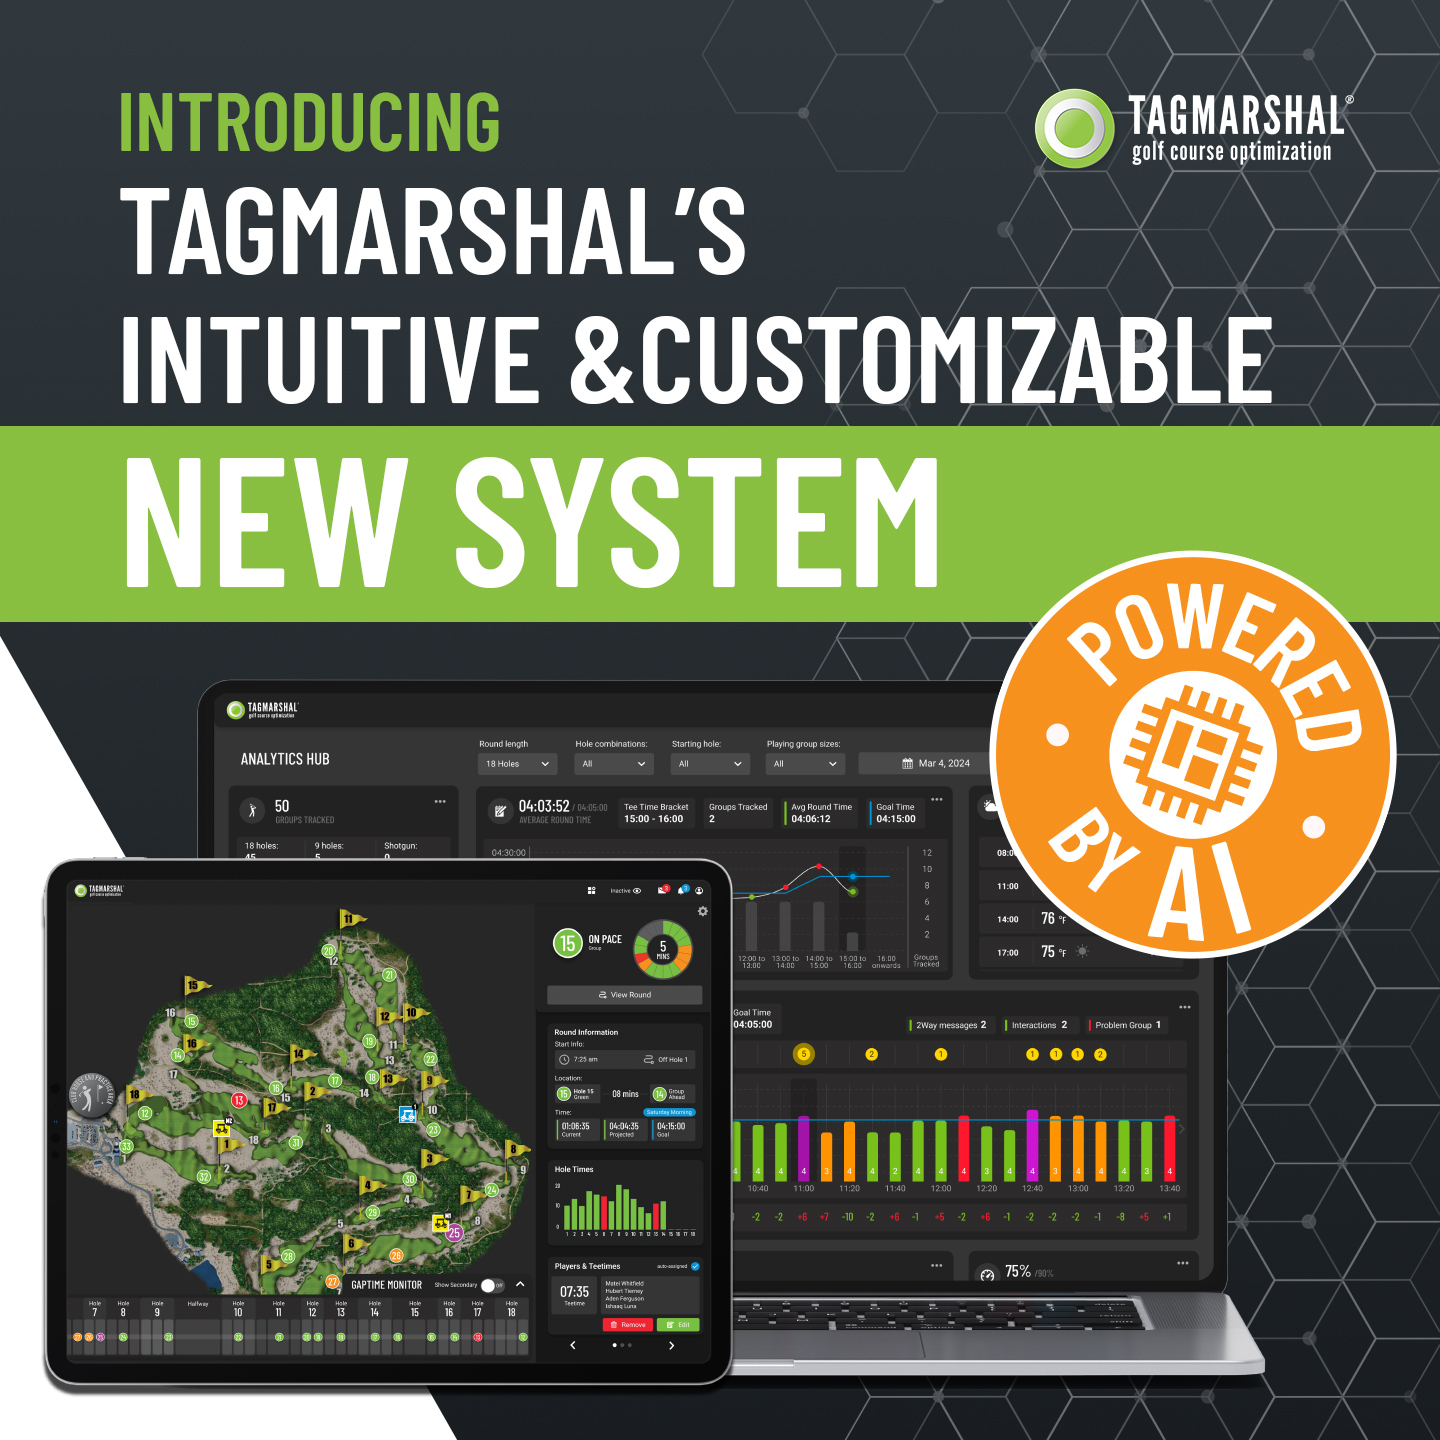 Introducing Tagmarshal’s intuitive new system, powered by AI